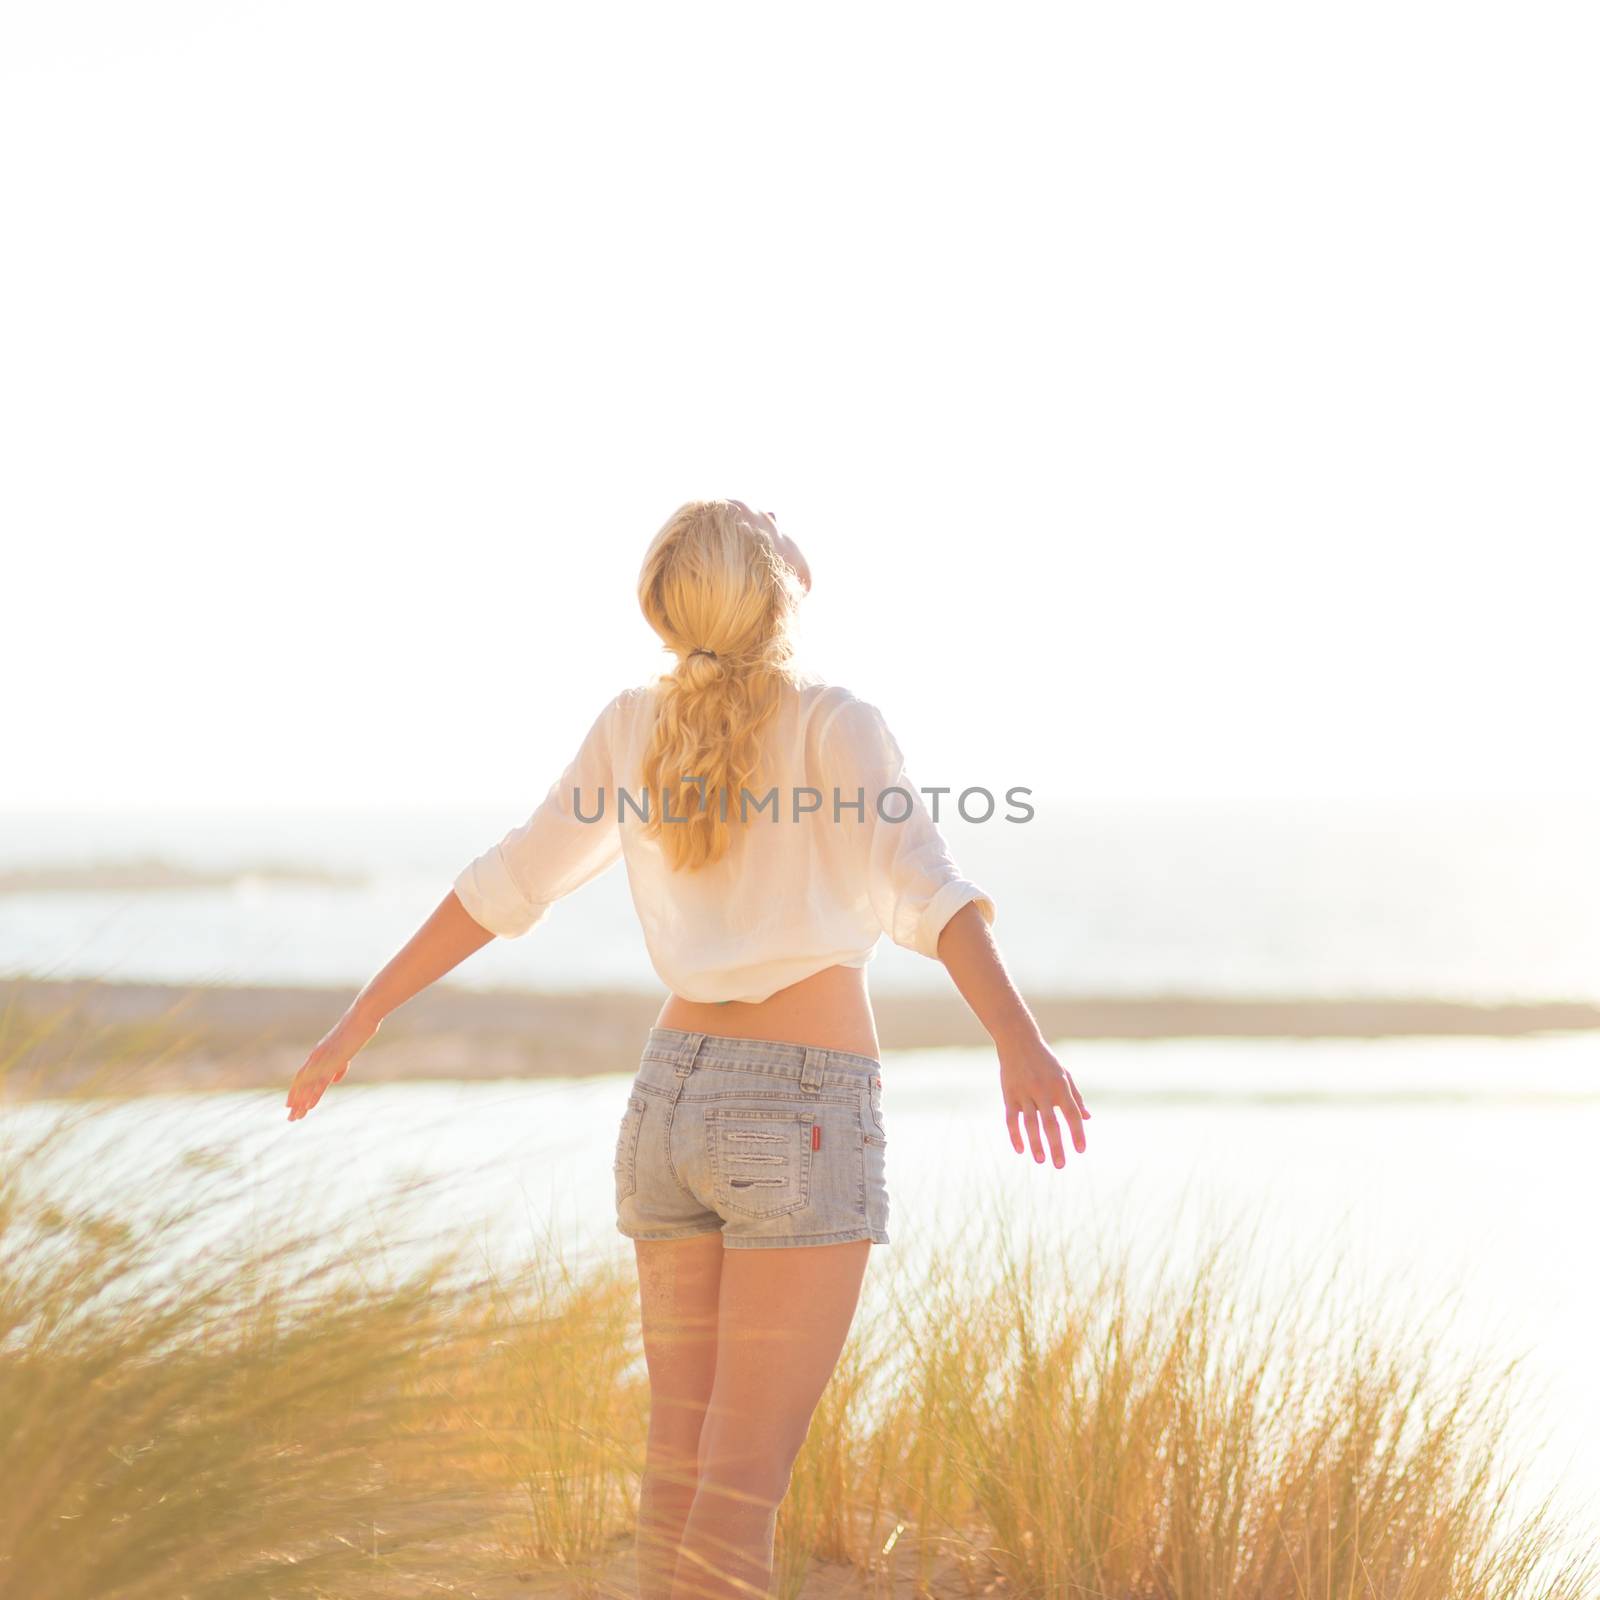 Relaxed woman enjoying freedom and life an a beautiful sandy beach.  Young lady feeling free, relaxed and happy. Concept of happiness, enjoyment and well being.  Enjoying Sun on Vacations. Copyspace.